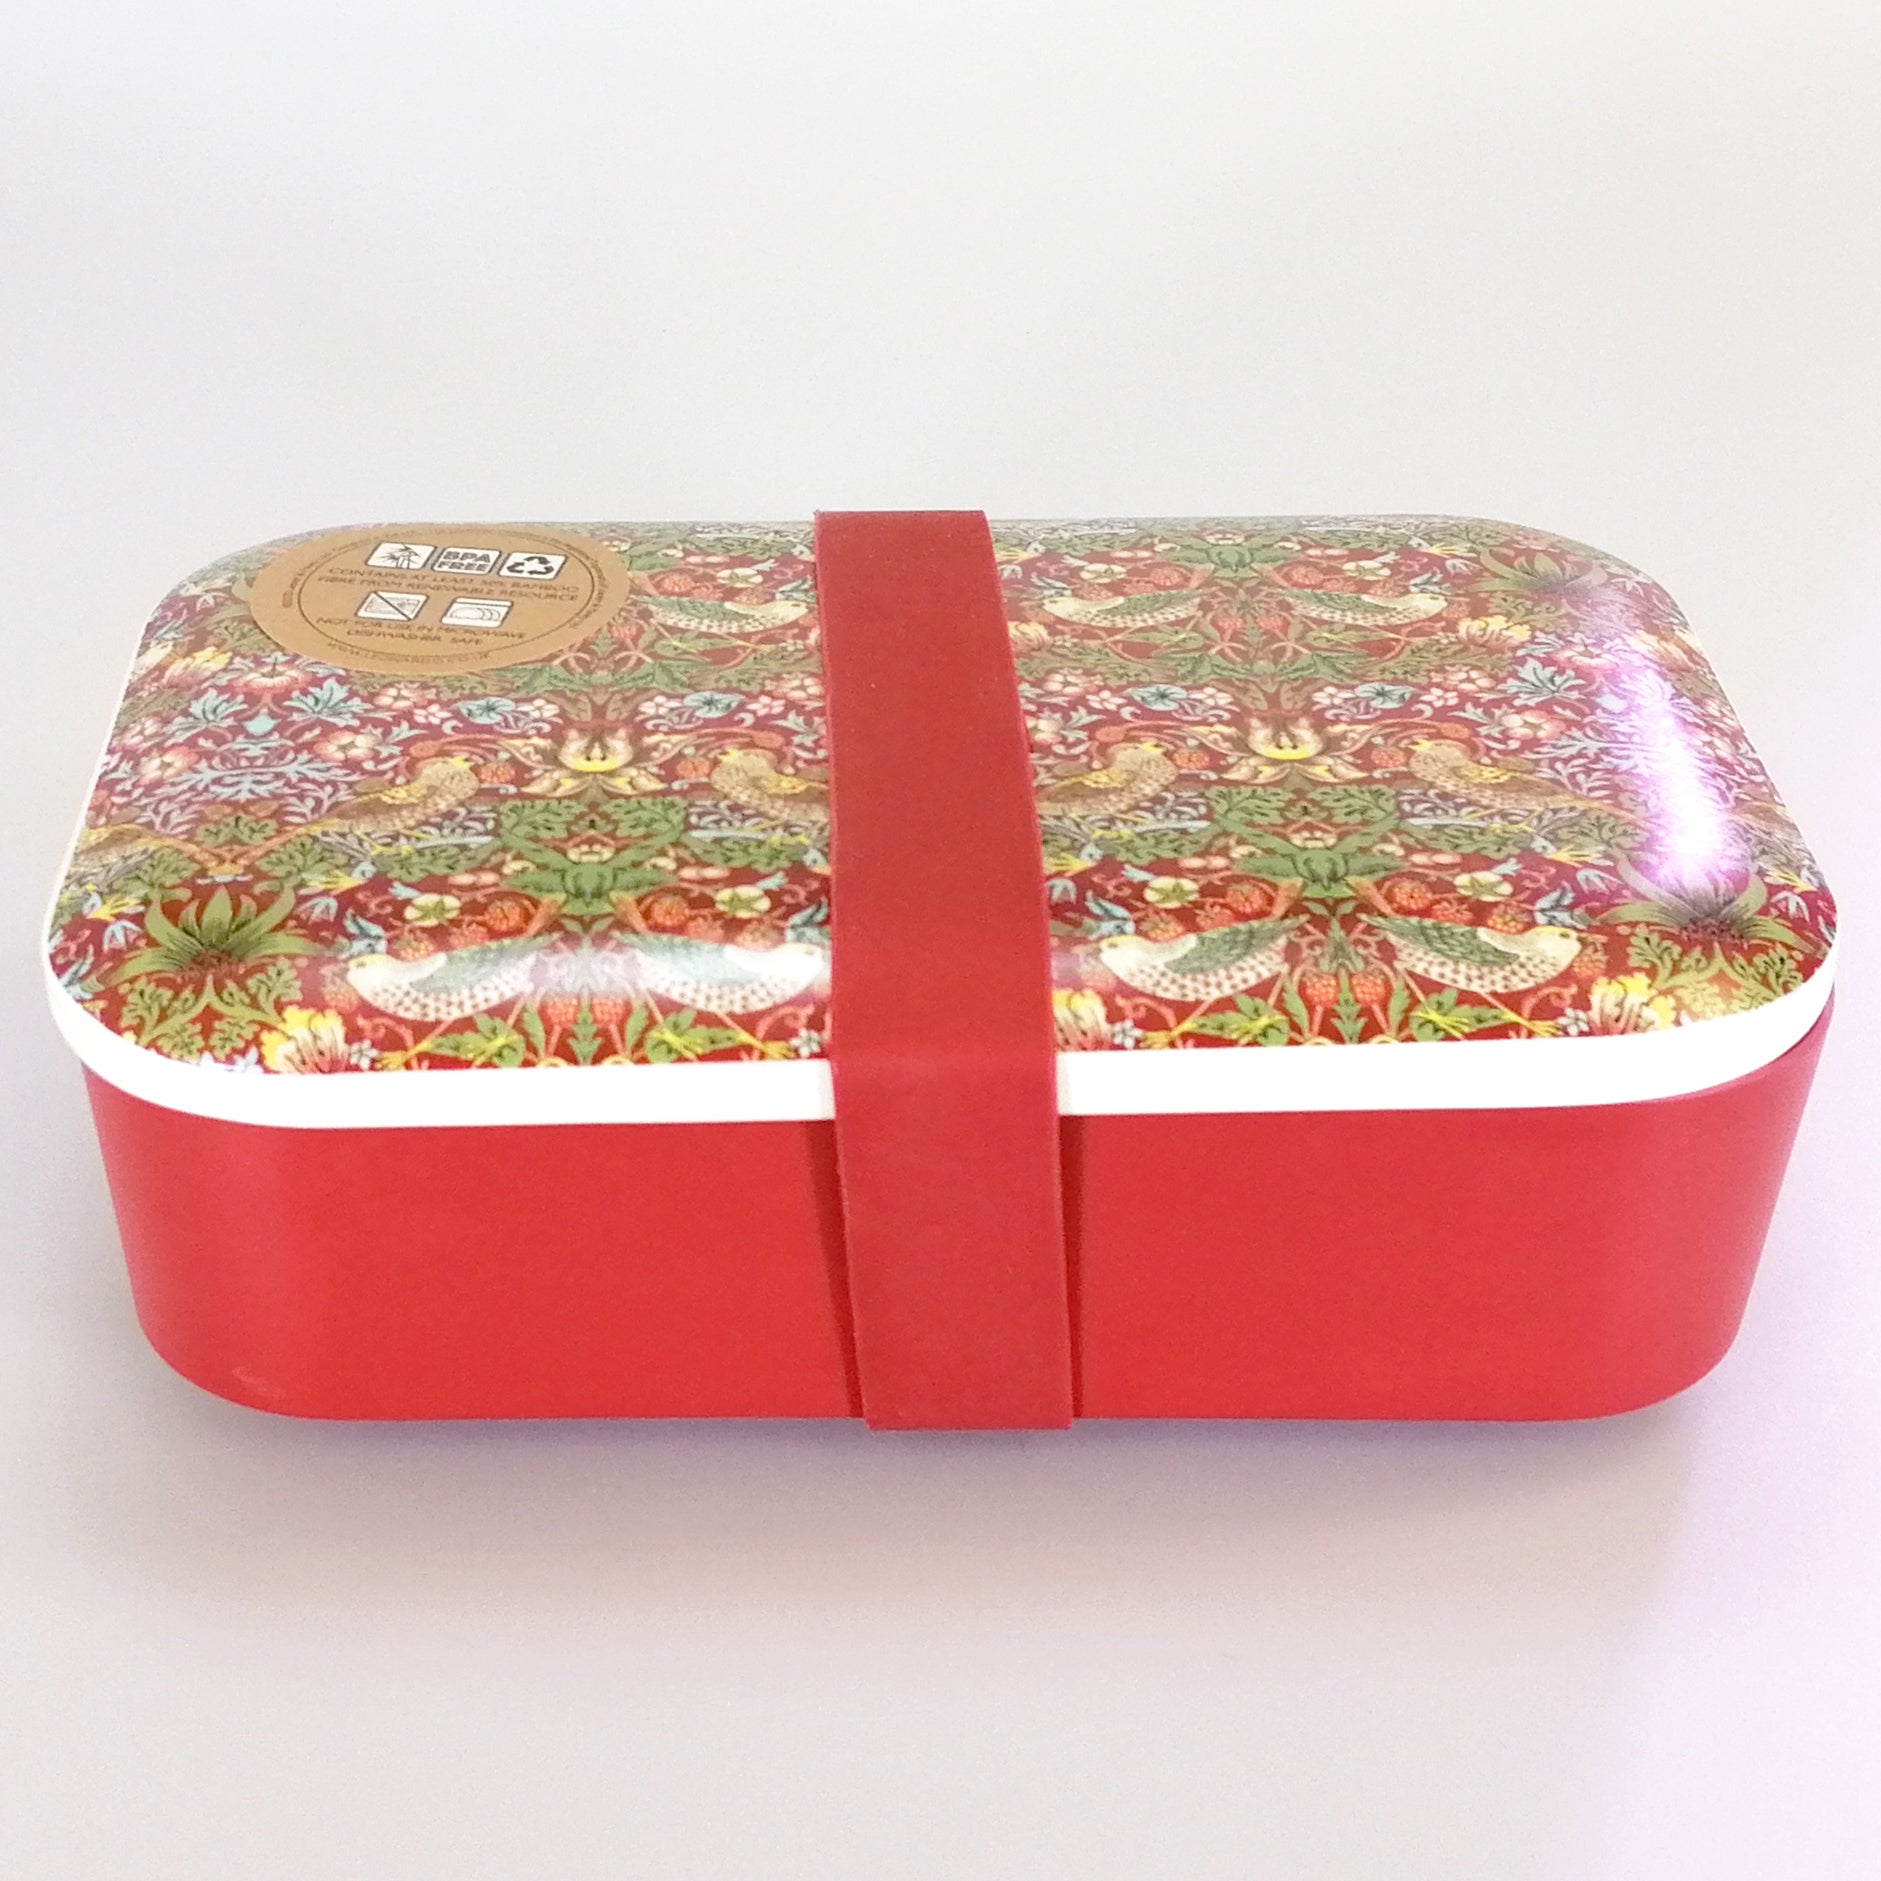 William Morris - Red Strawberry Thief Lunch Box